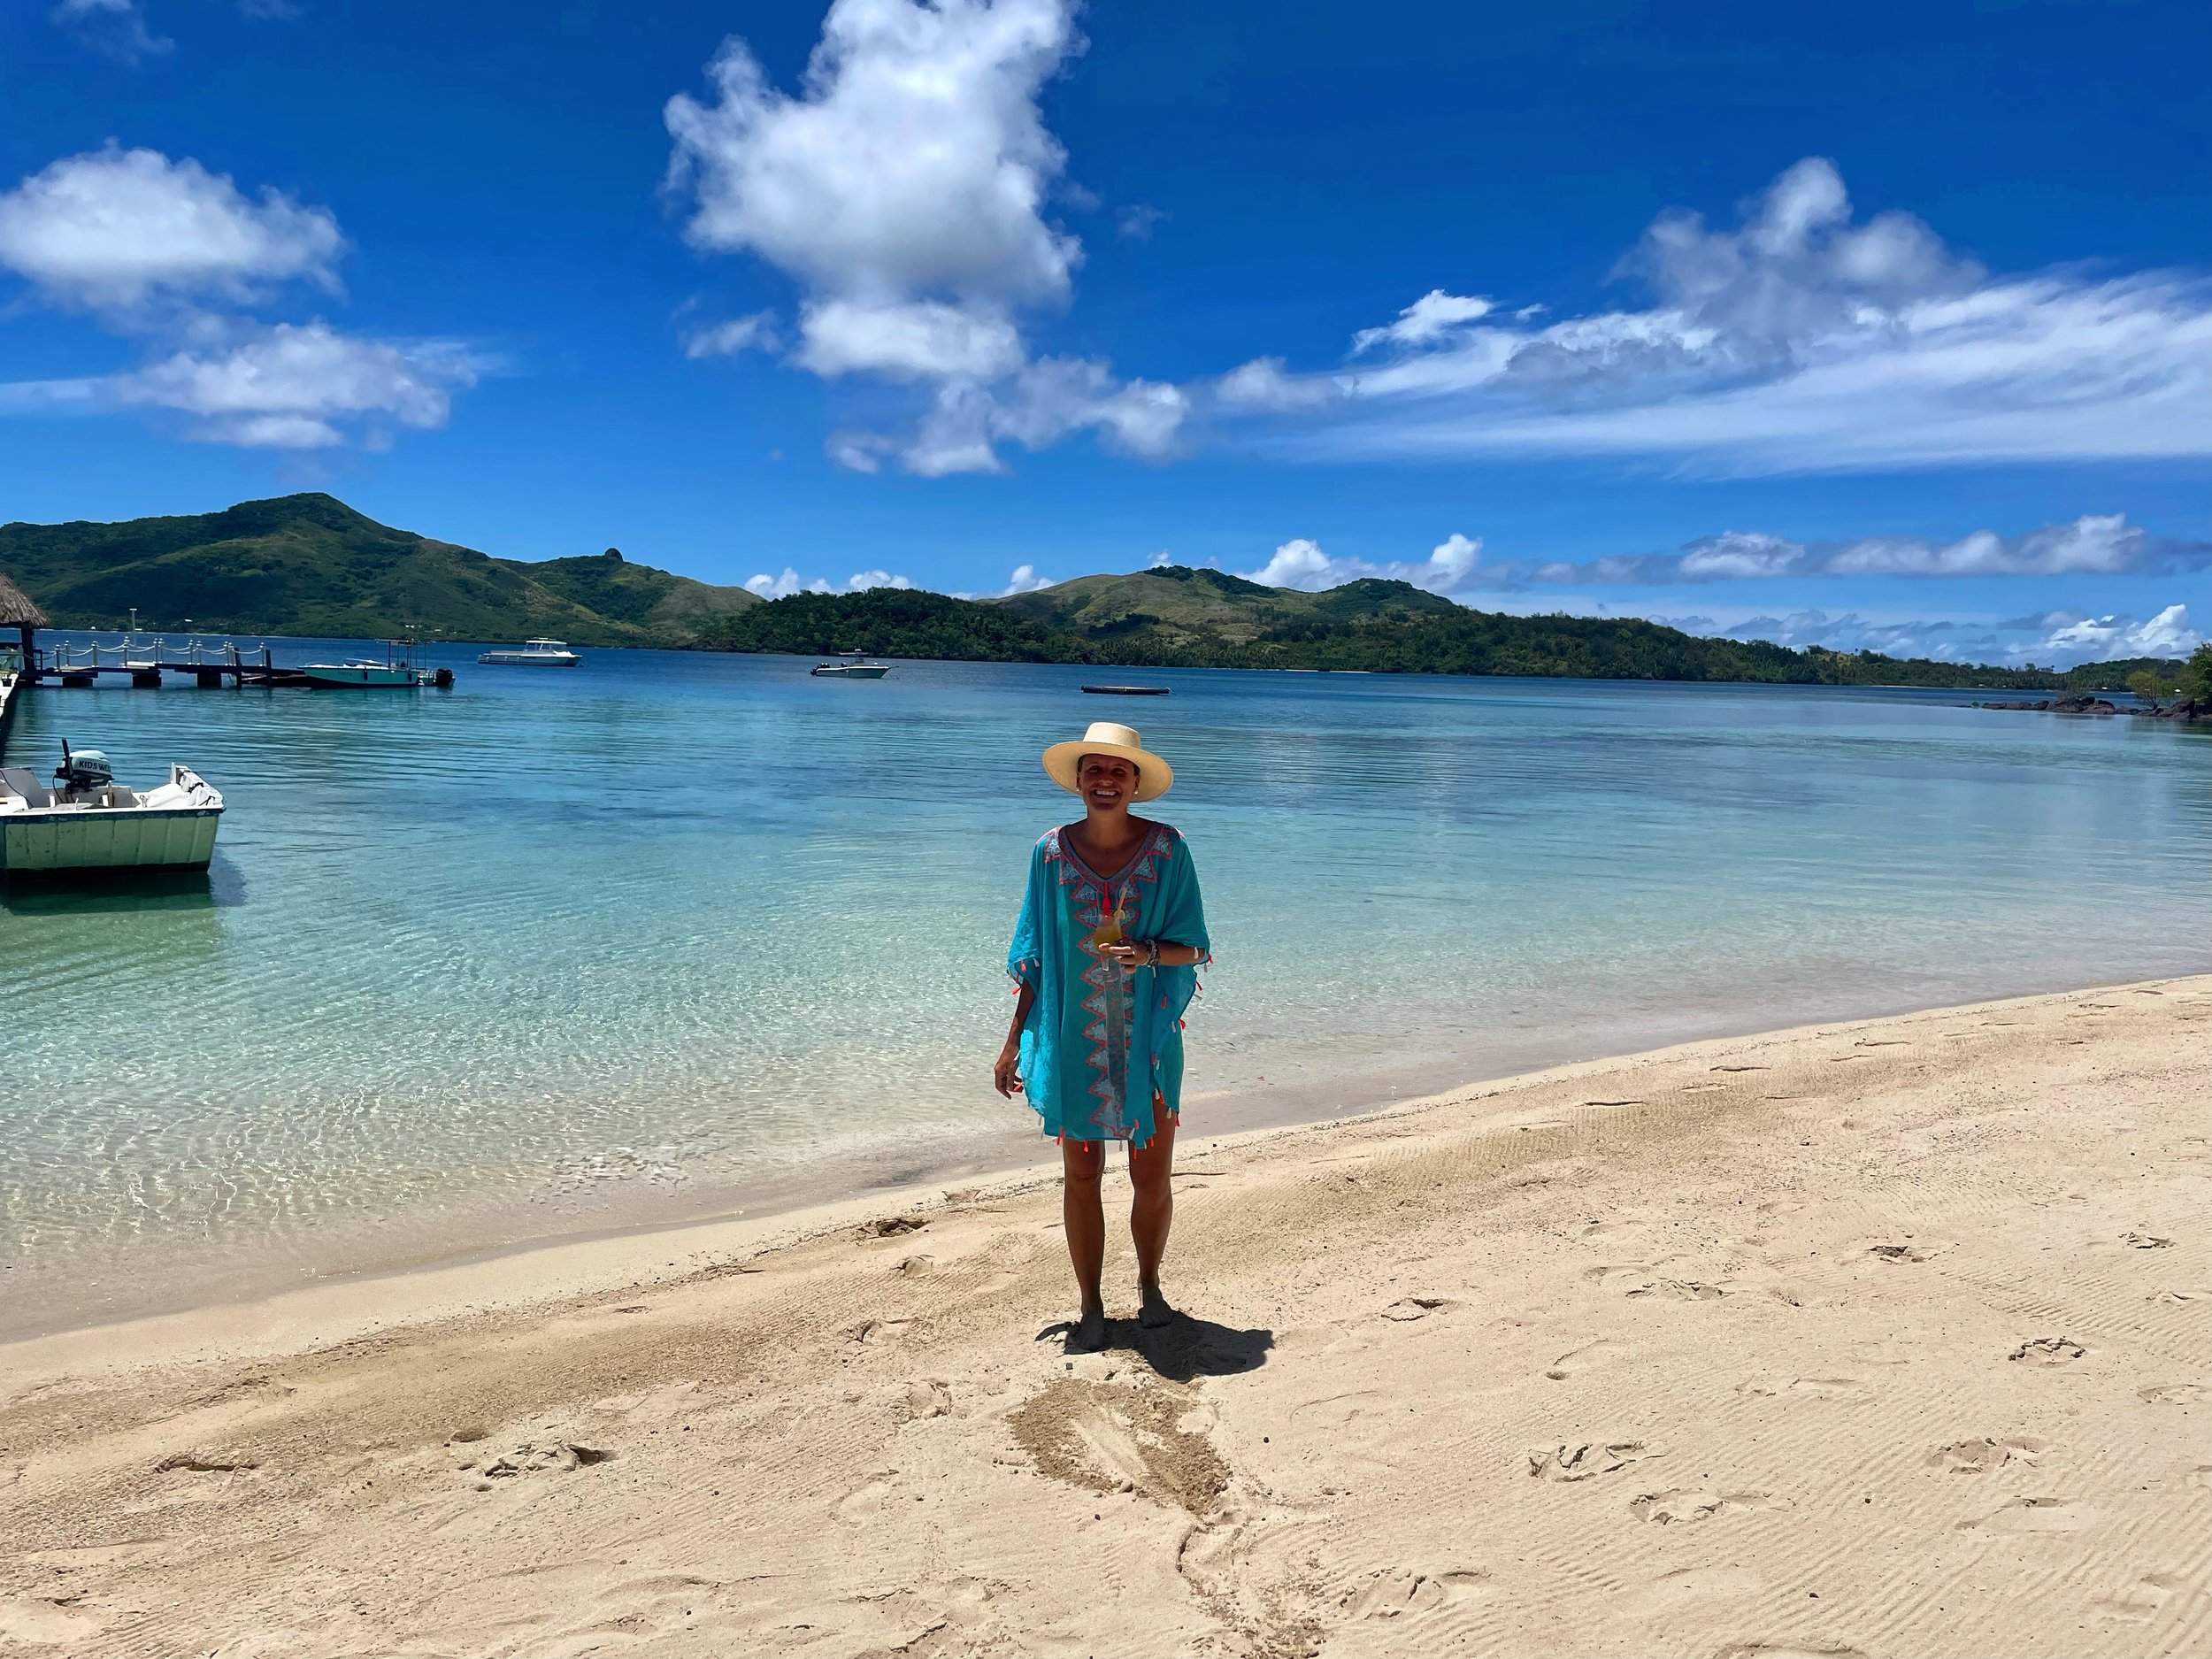 Copy of Blending in with the scenery at Turtle Island Fiji.JPG